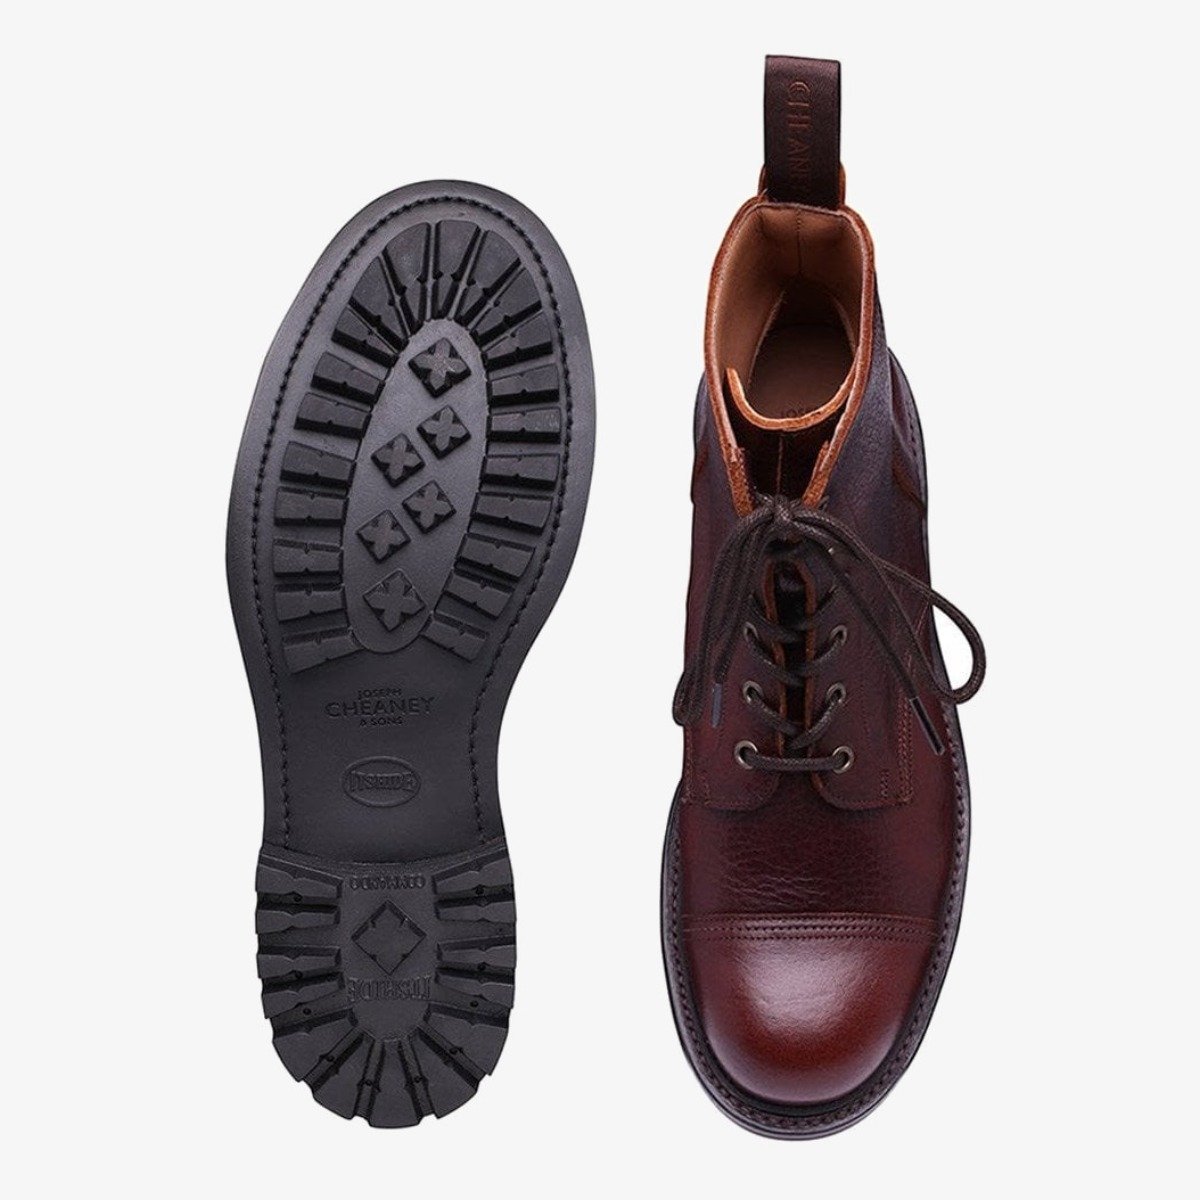 Cheaney Hurricane II whiskey toe cap lace-up boots